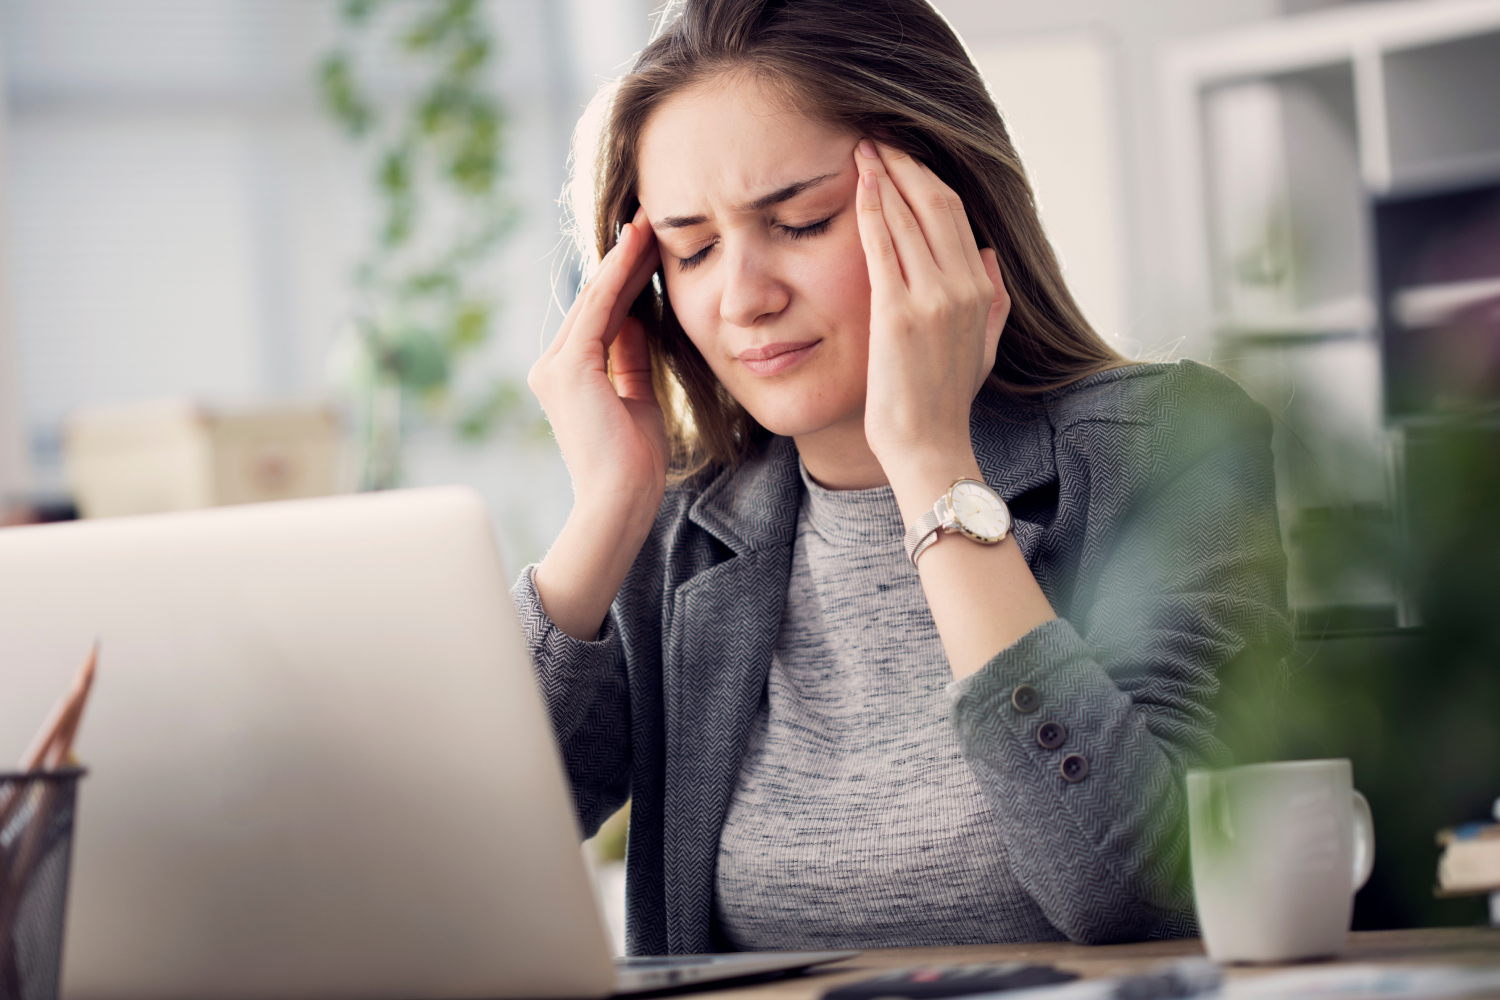 Can You Get Headaches From Lack of Sleep